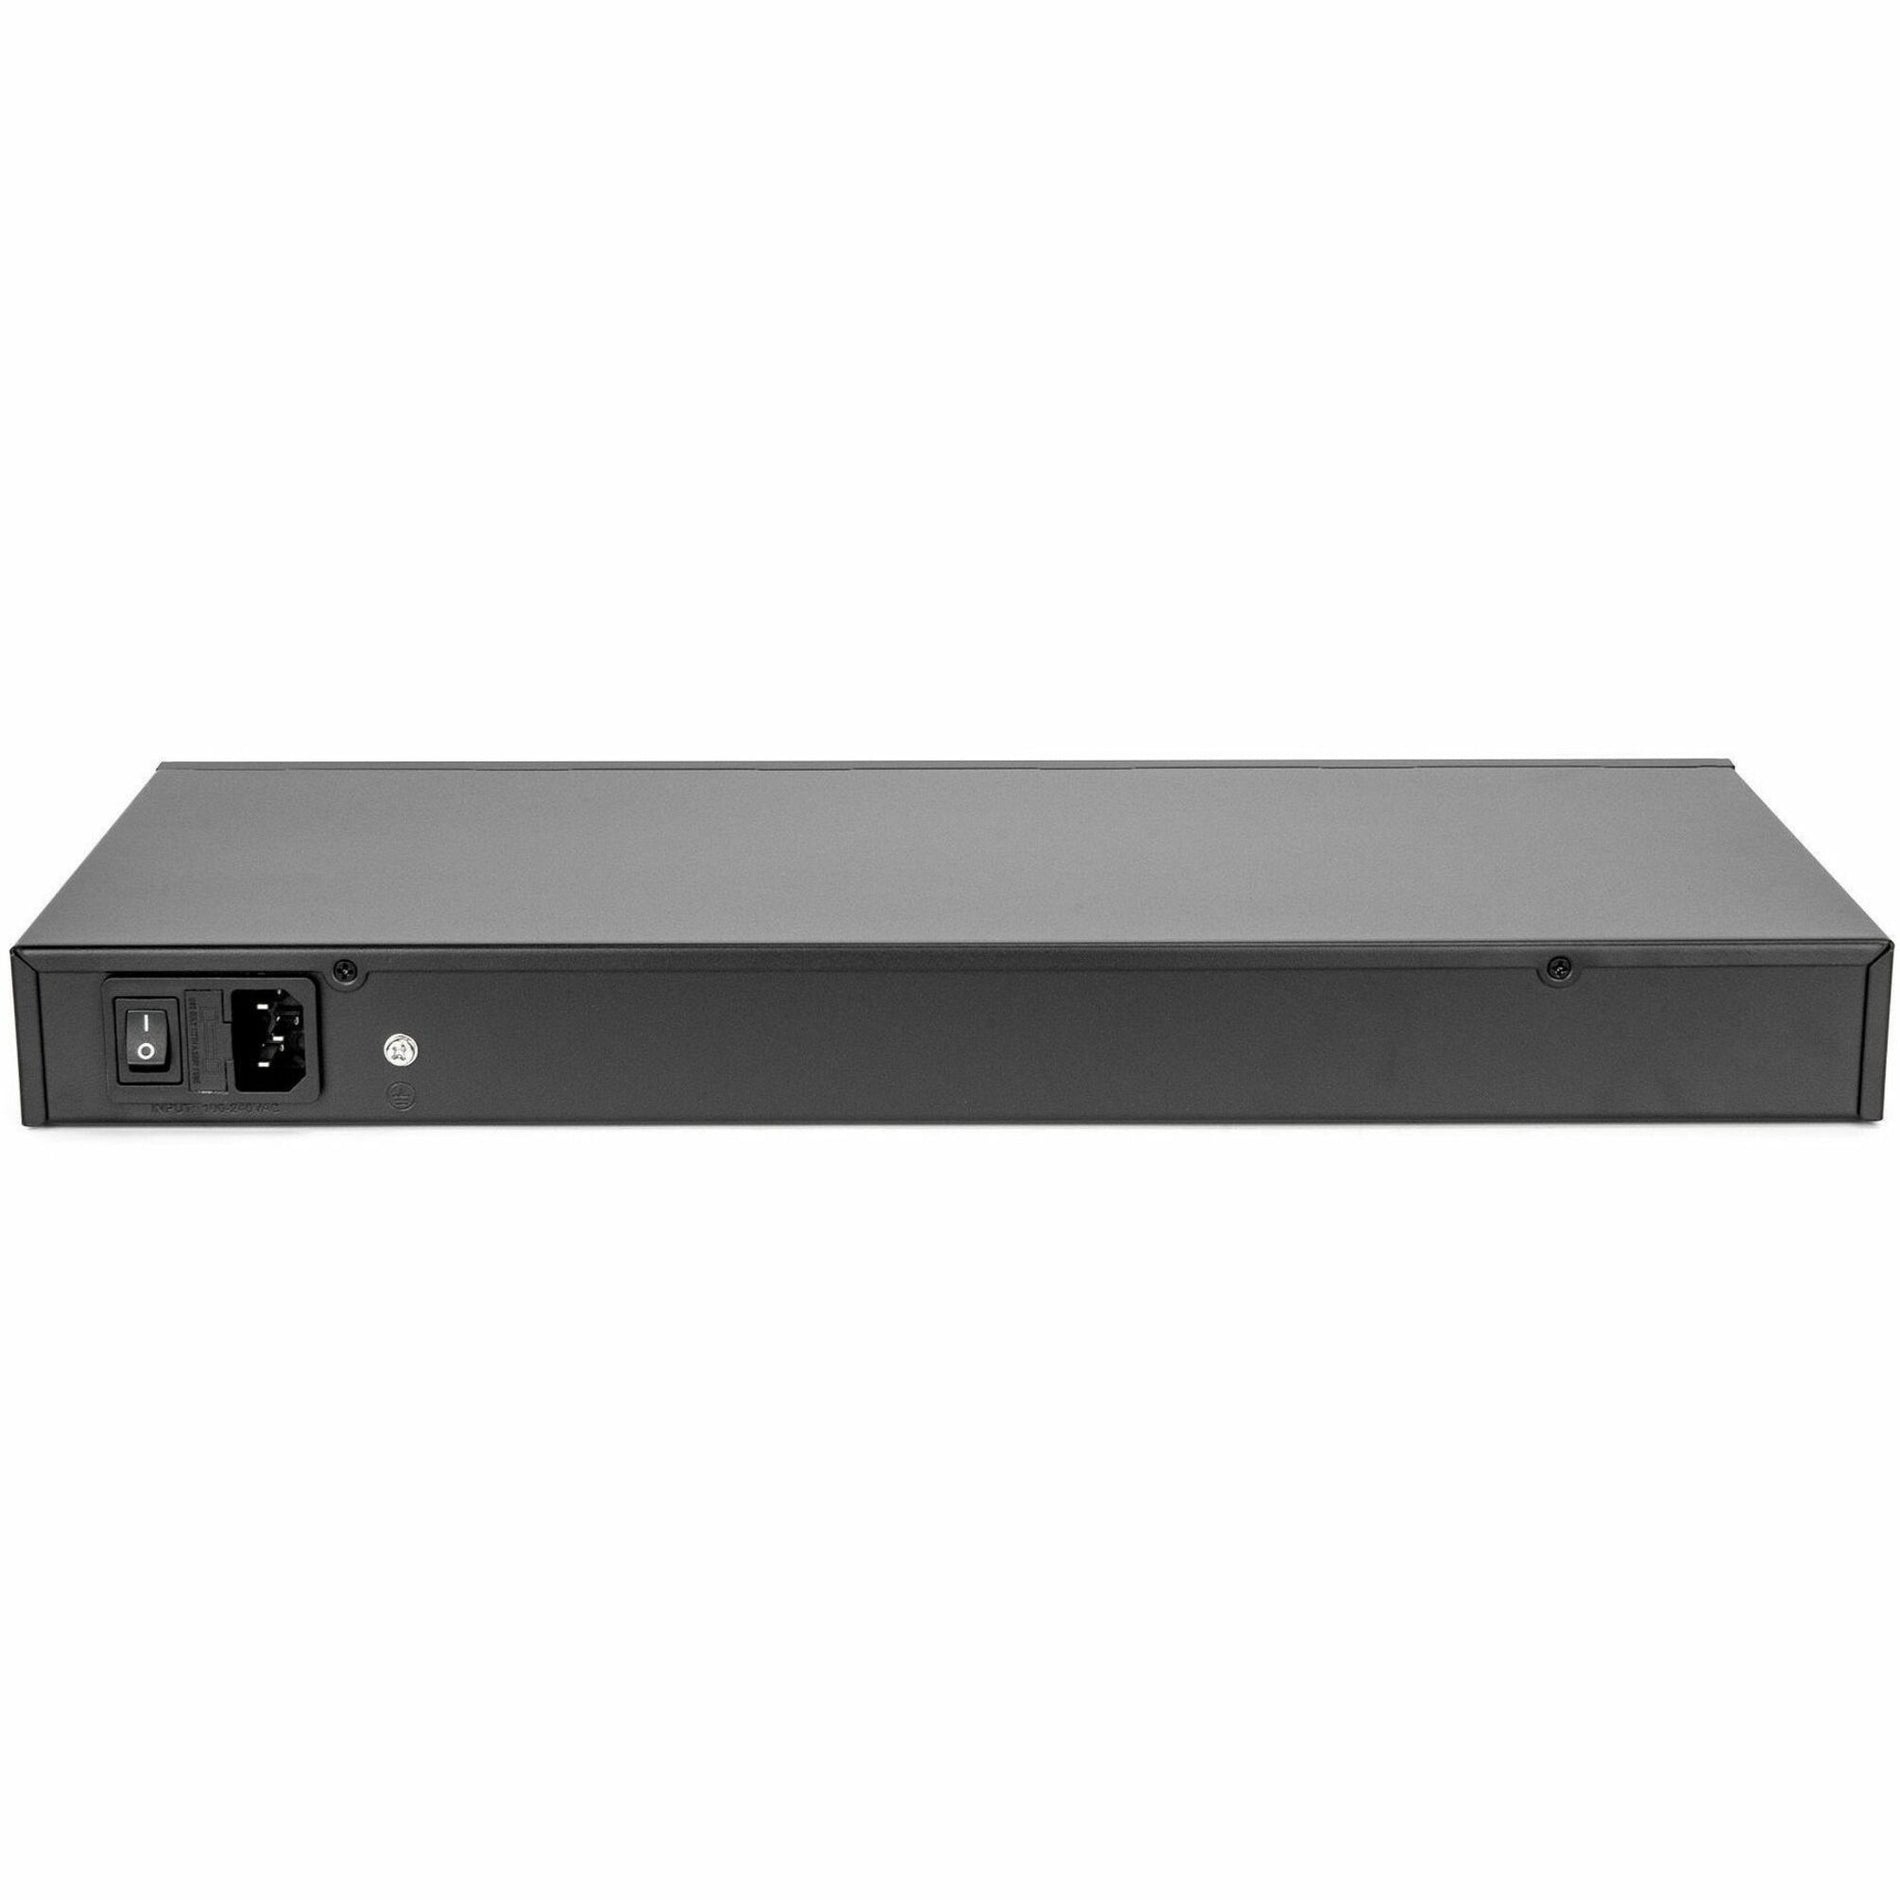 Rocstor Y10S011-B1 SolidConnect SCM28 24-Port PoE+ Gigabit Managed Switch, Industrial Network Government